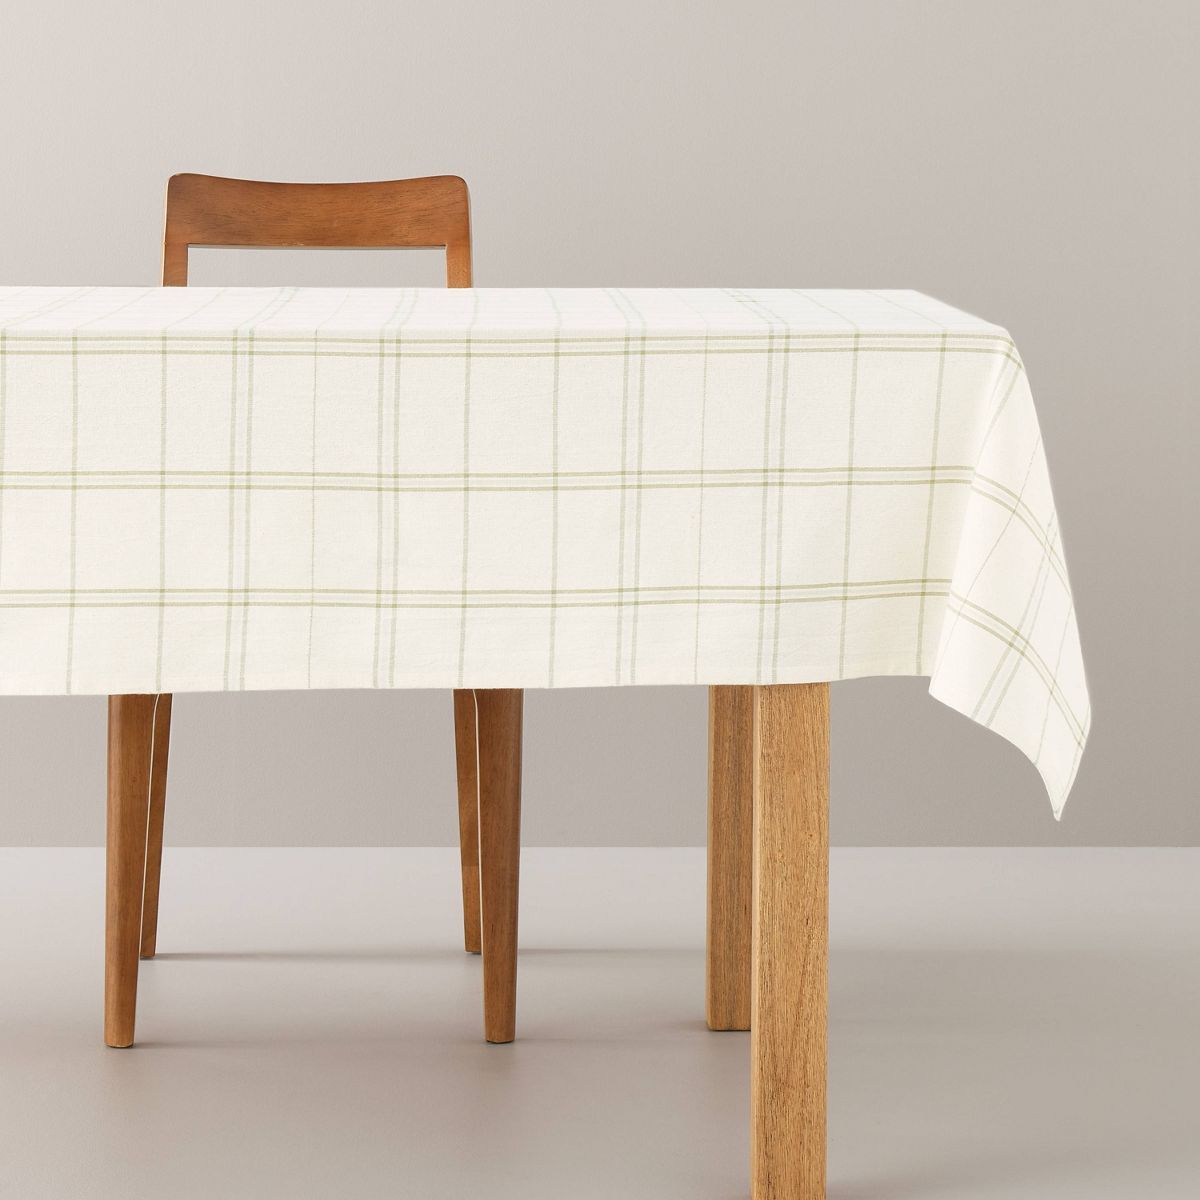 Tri-Stripe Plaid Rectangular Tablecloth Light Green/Natural - Hearth & Hand™ with Magnolia | Target